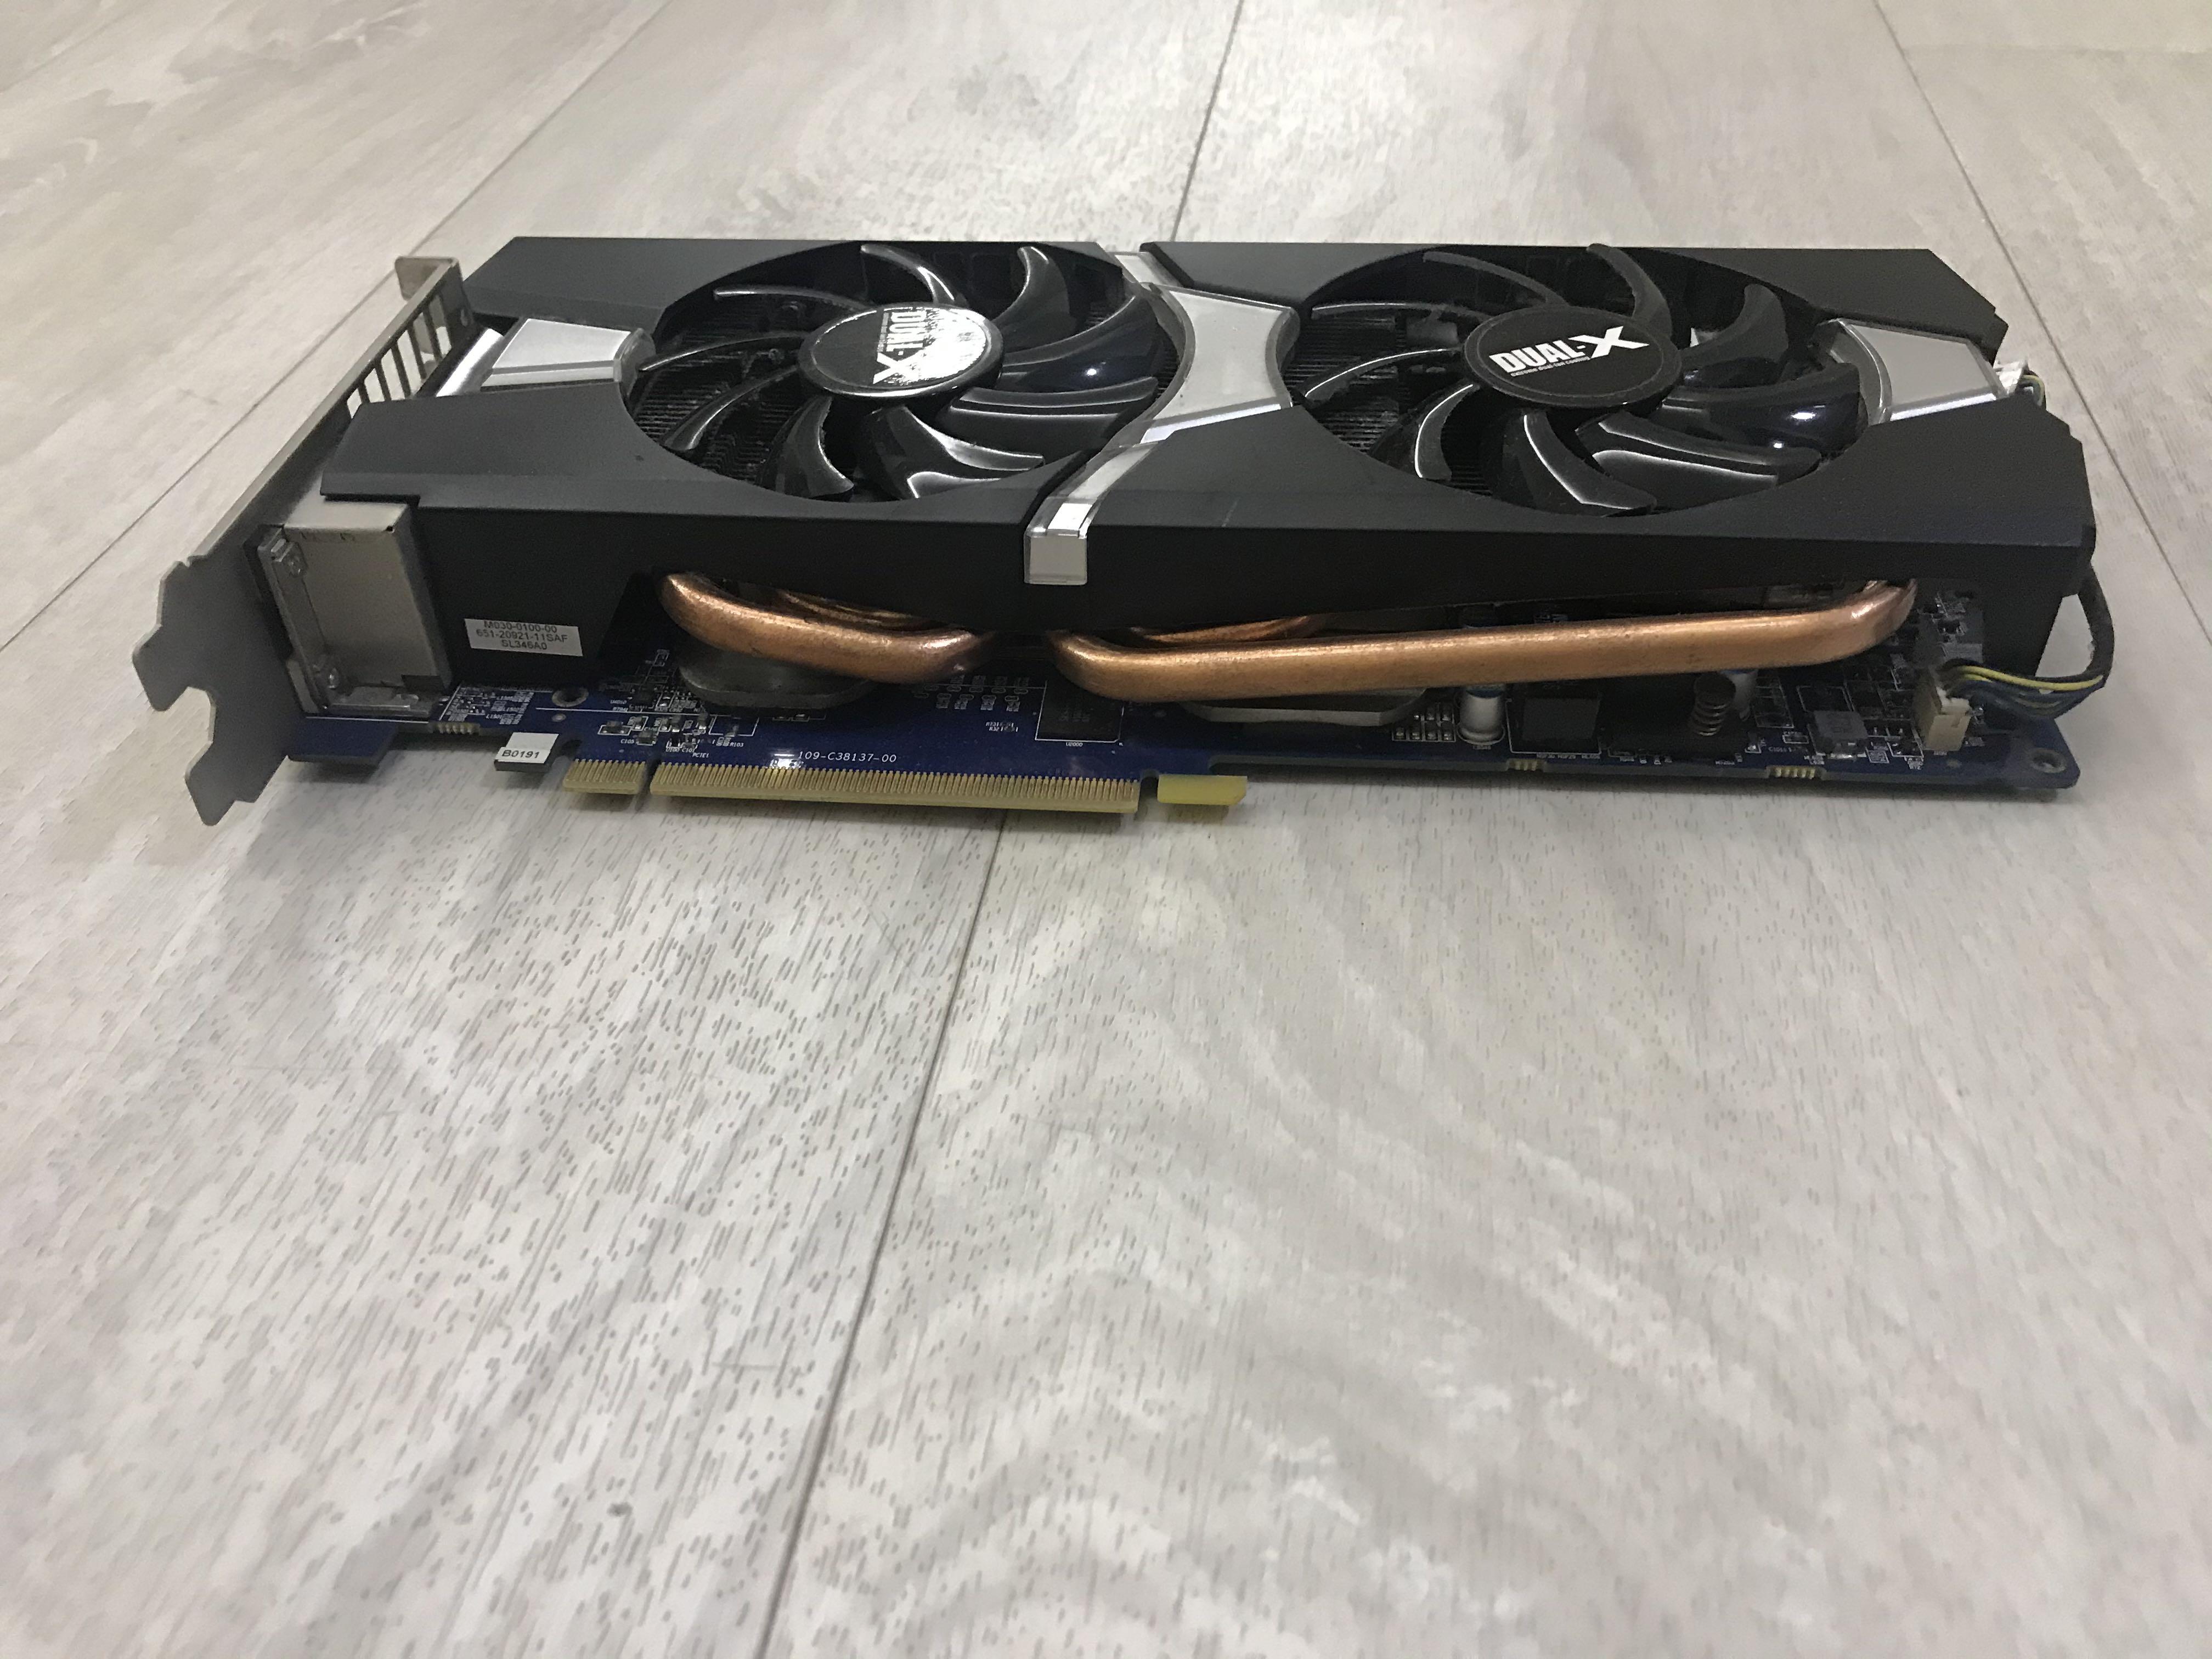 Sapphire Radeon R9 280x Dual X Edition Graphics Card Pc Pro Gaming Video Card Computers Tech Parts Accessories Networking On Carousell